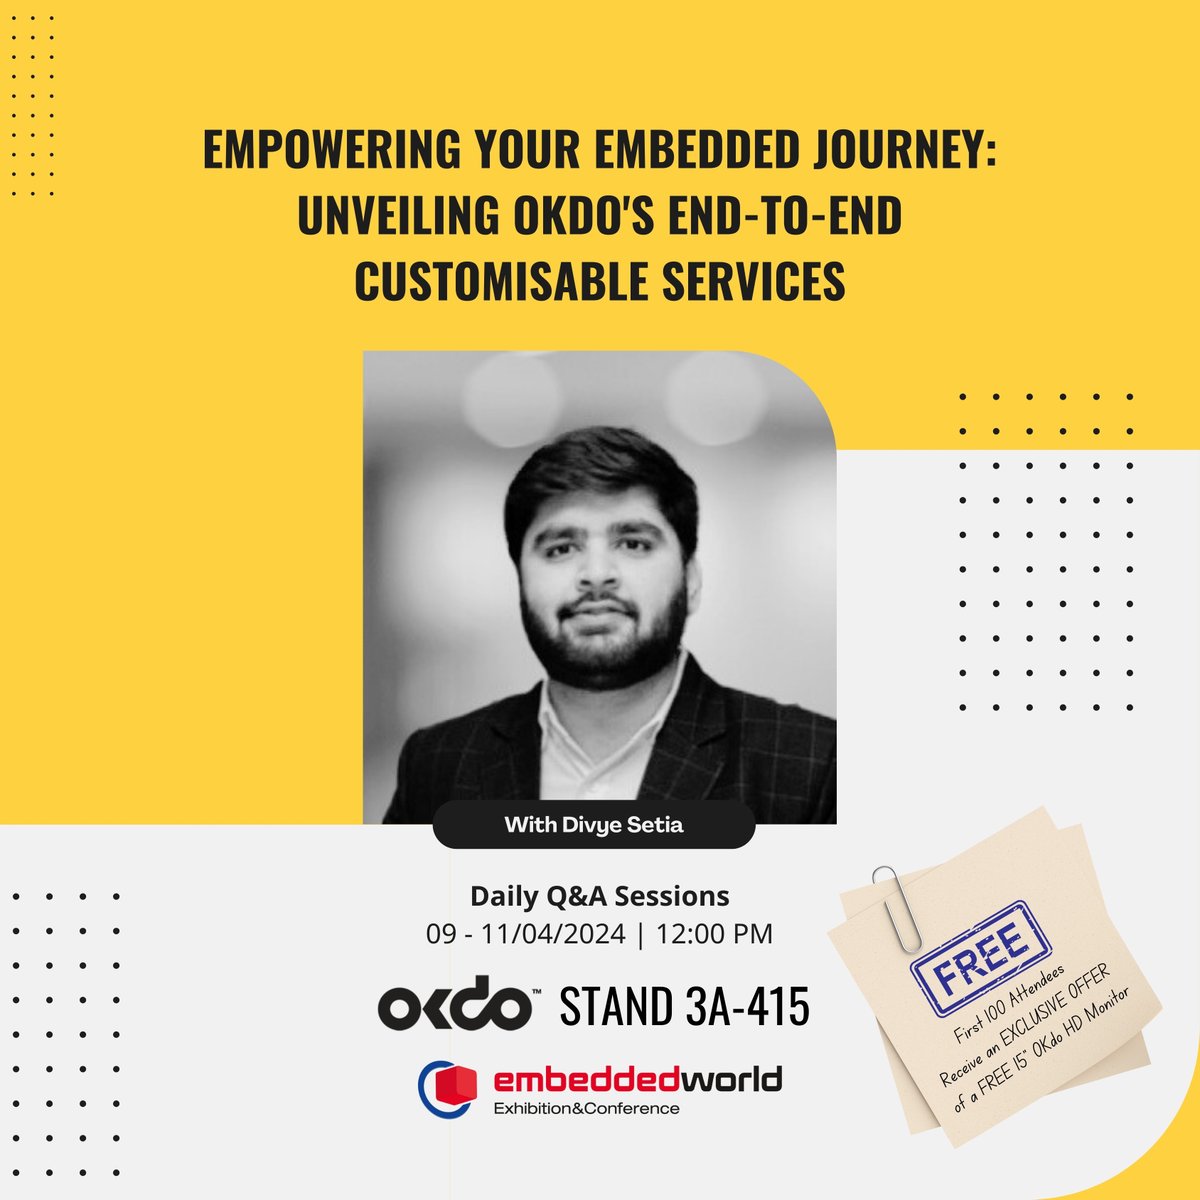 #EmbeddedWorld 2024 is happening now! Join us daily at 12PM on stand 3A-415 for Q&A sessions with Divye Setia and explore OKdo's customisable services. Plus, be one of the first 100 attendees to receive a FREE 15' OKdo HD Monitor. Don't miss out! See you there! #LetsOKdo #EW24